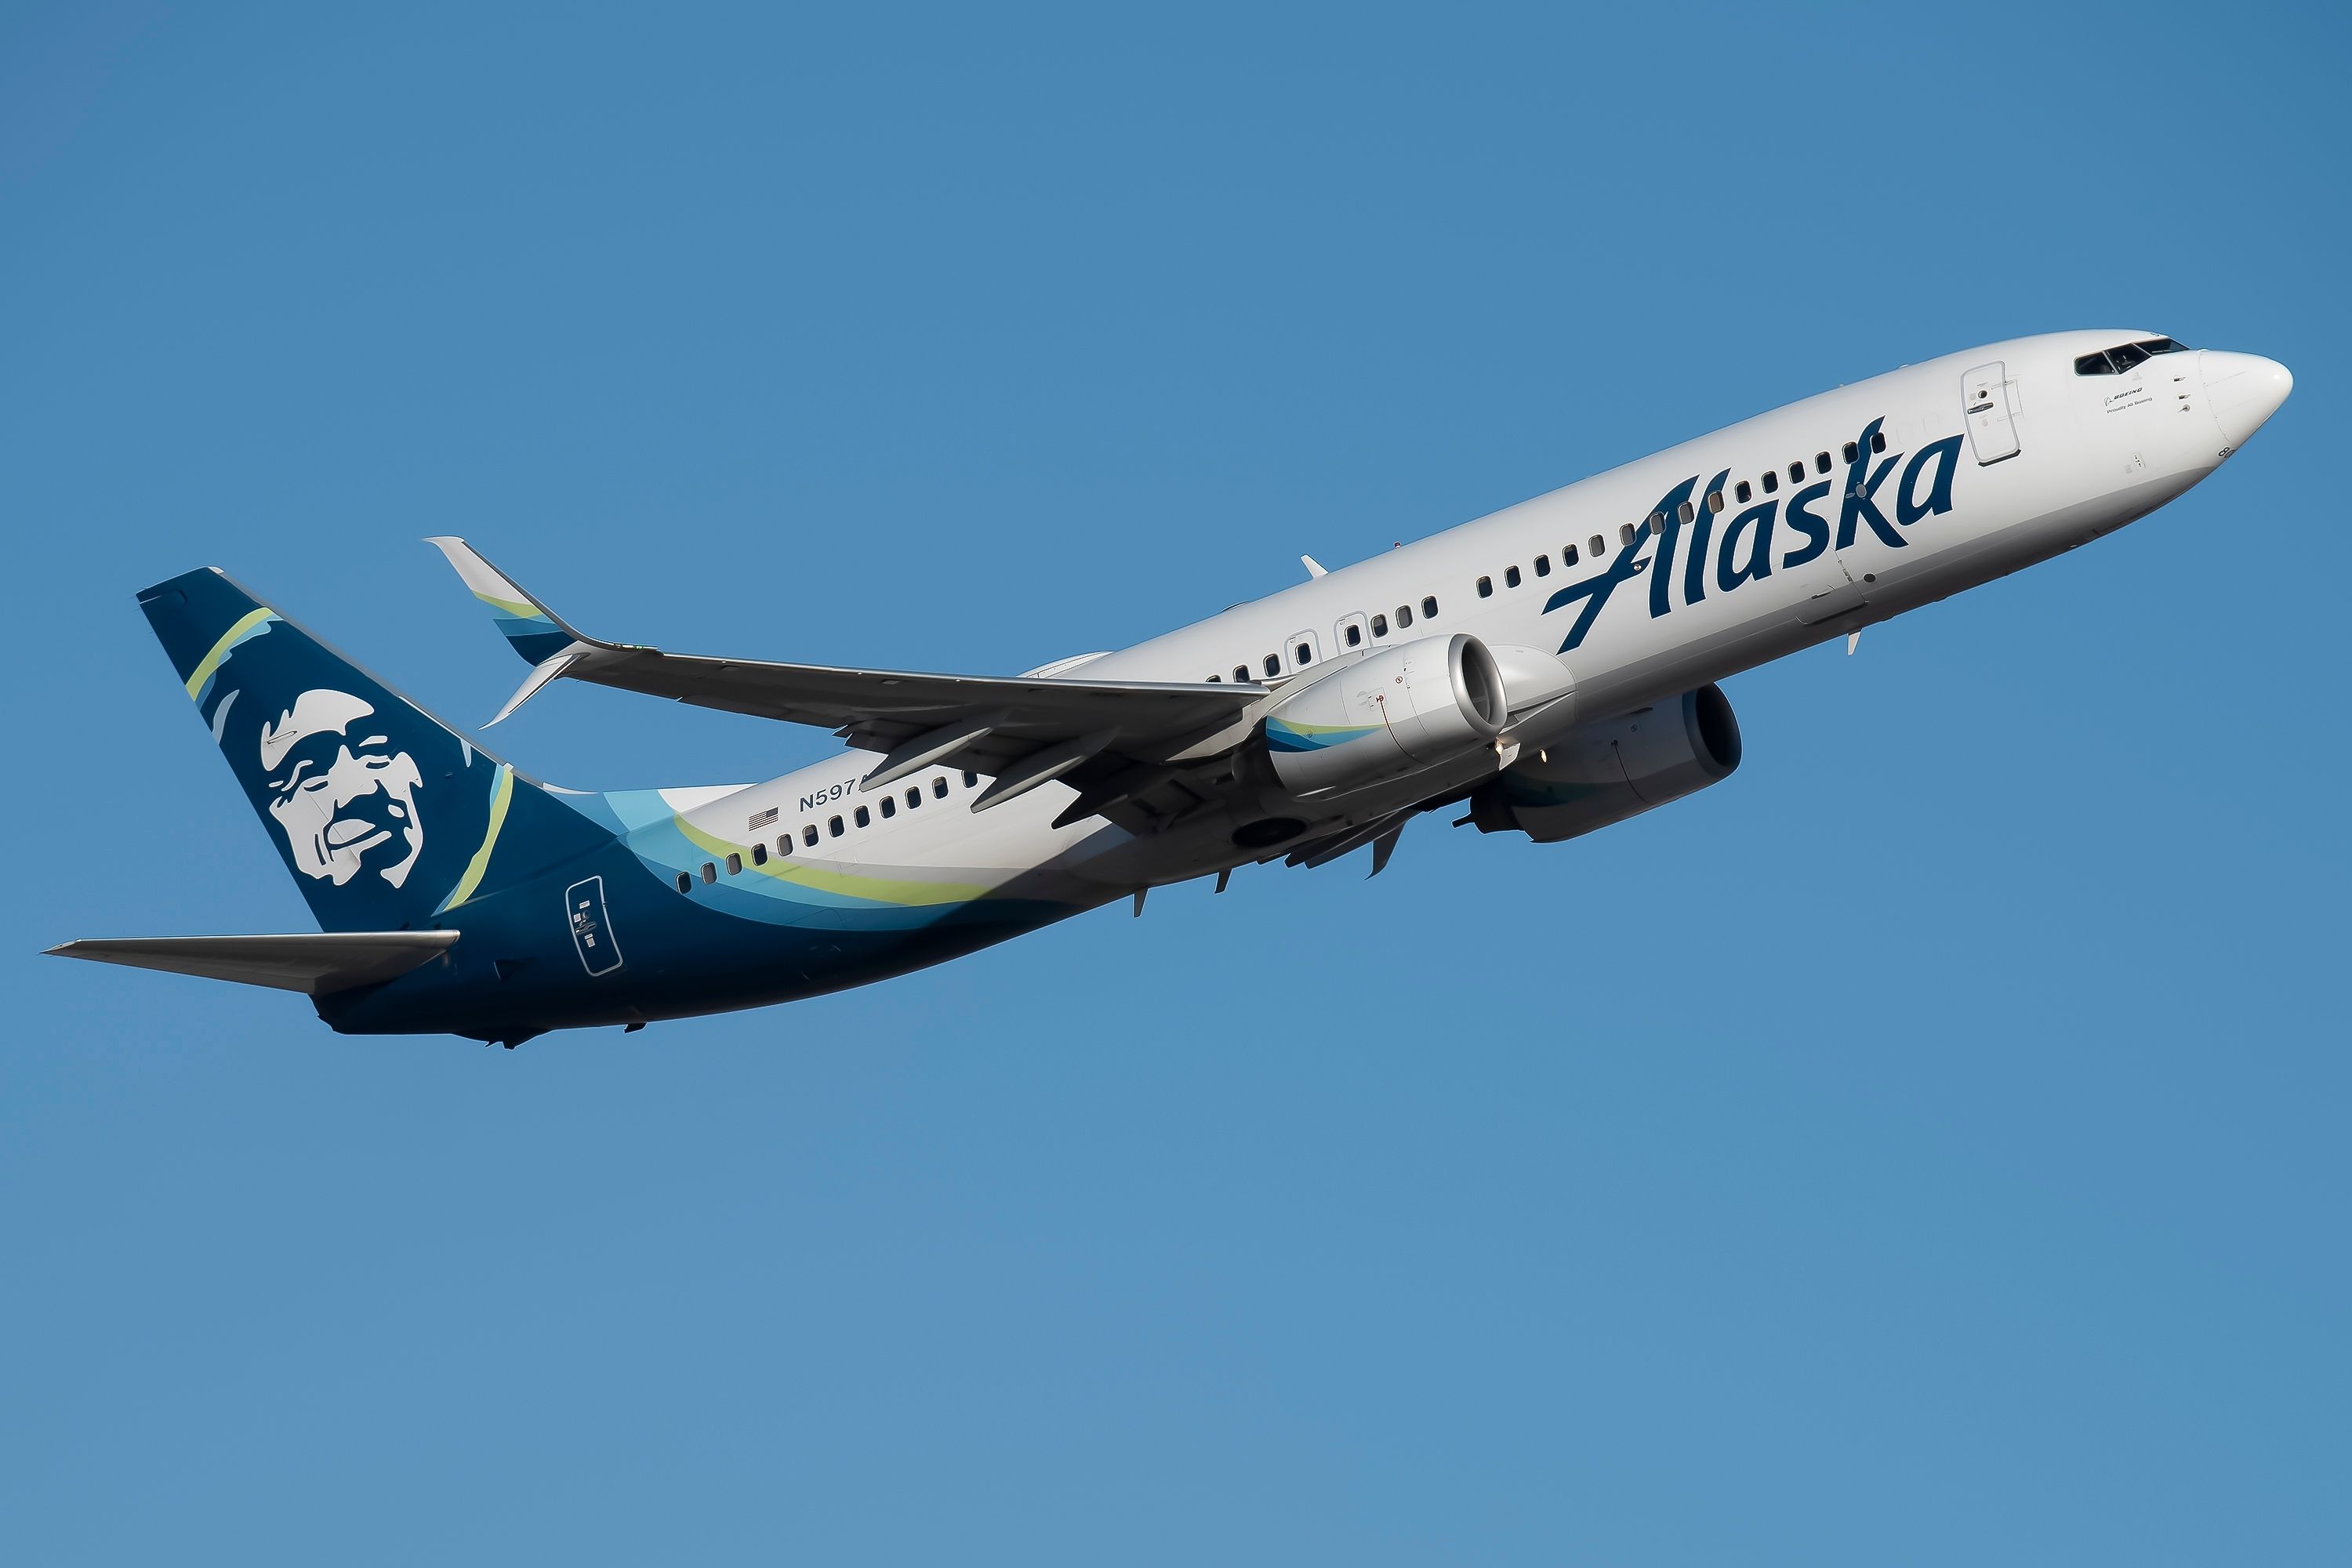 An Alaska Airlines Boeing 737-800 flying in the sky.